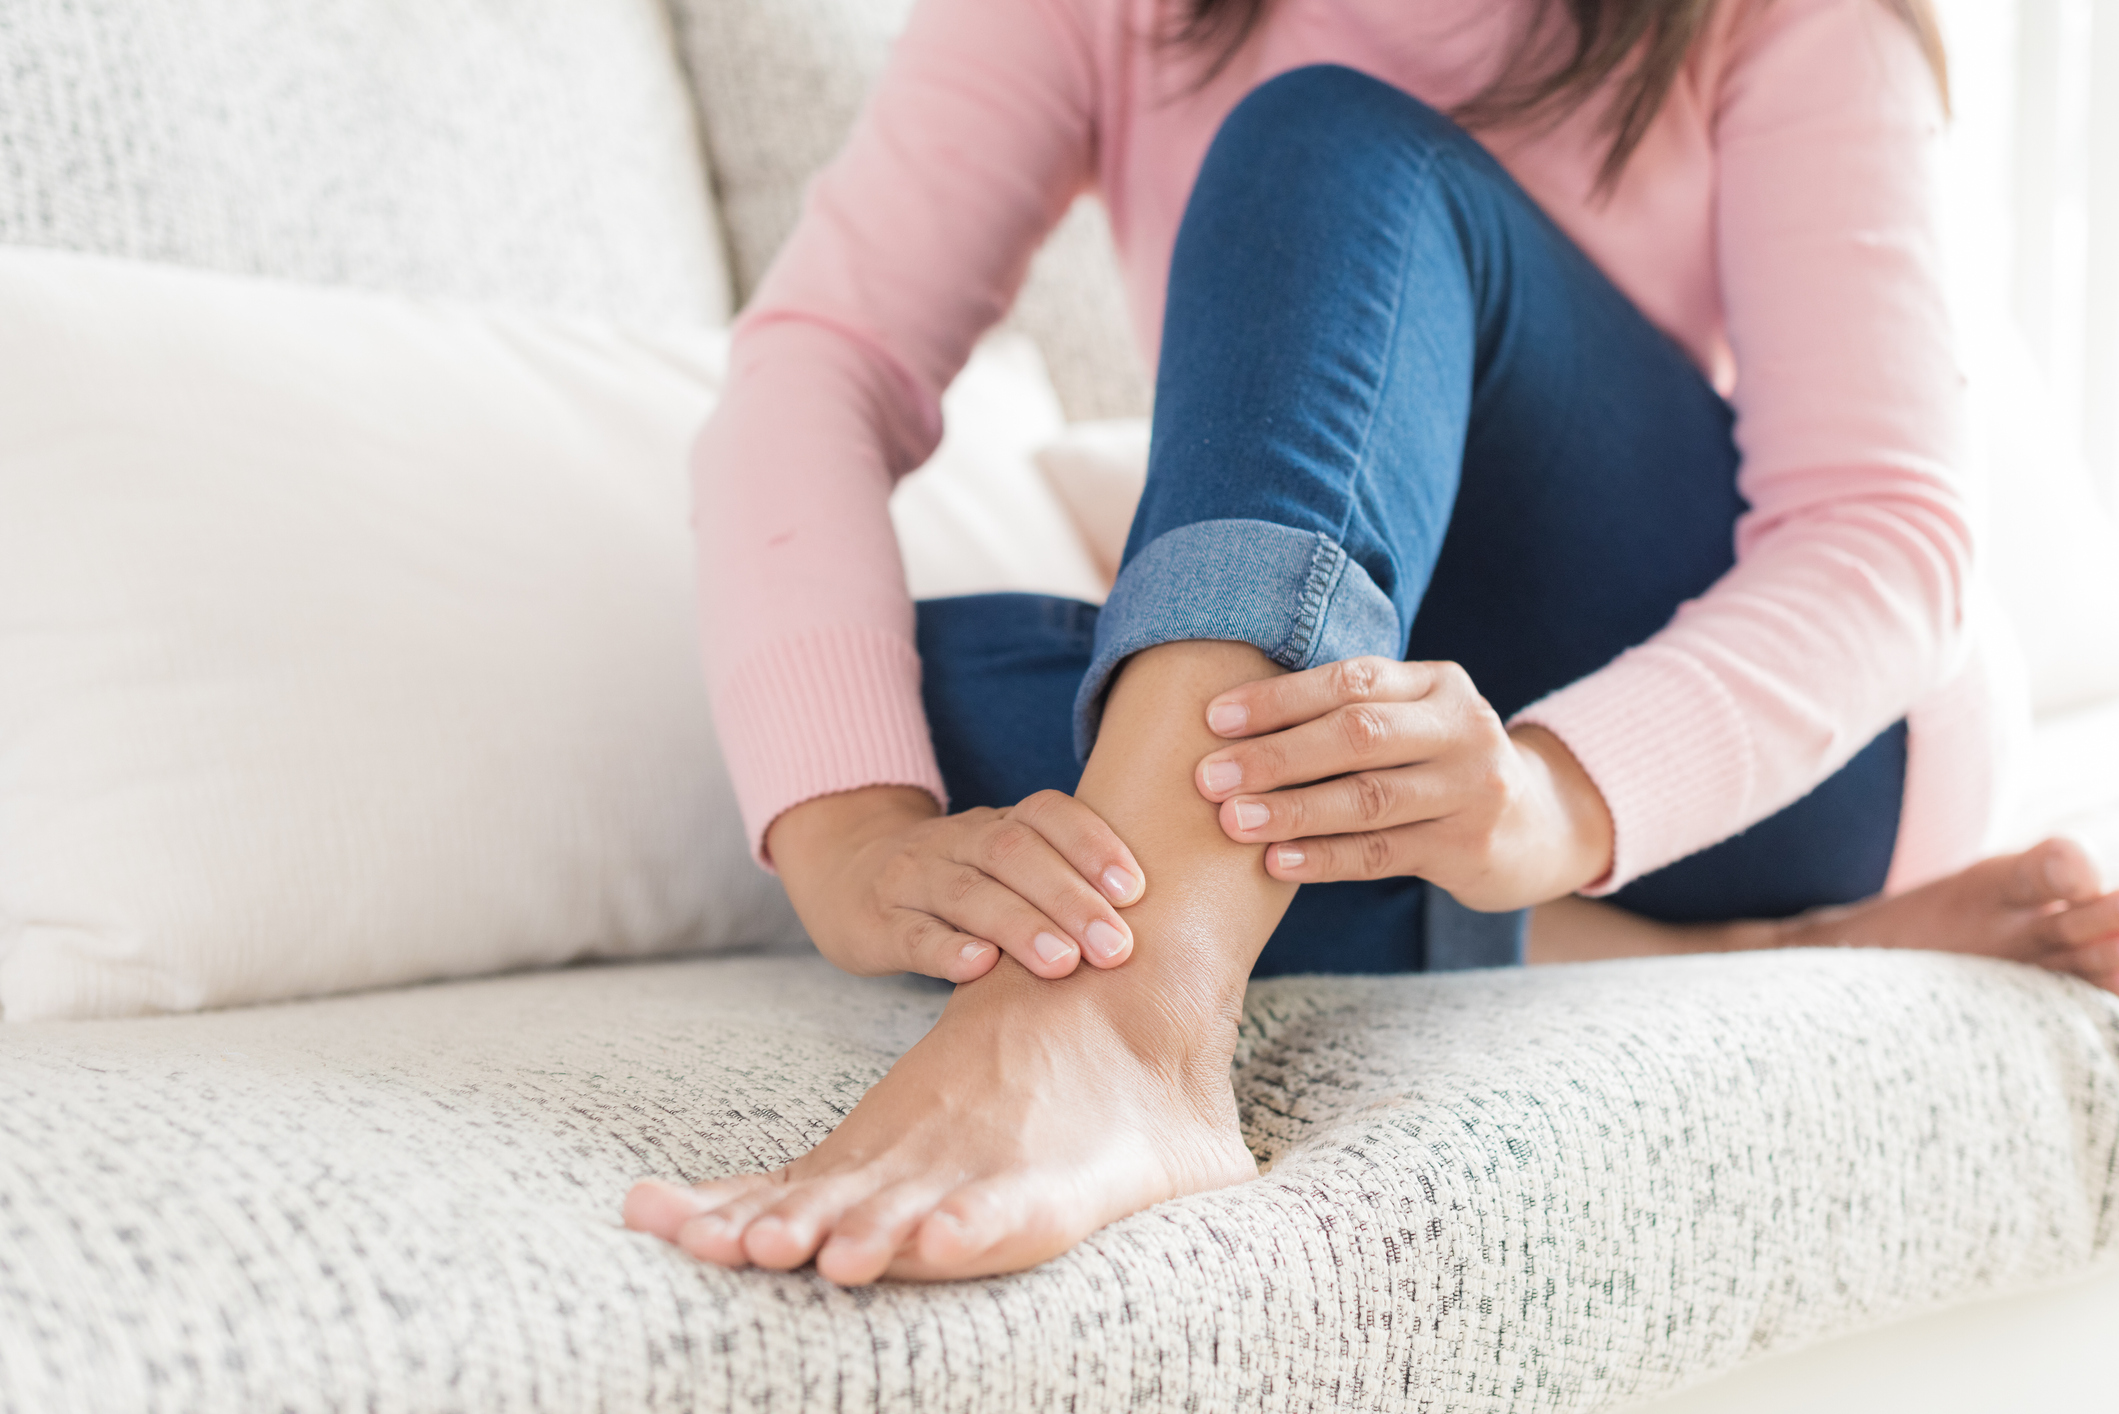 Quick Tips for Managing Ankle Pain